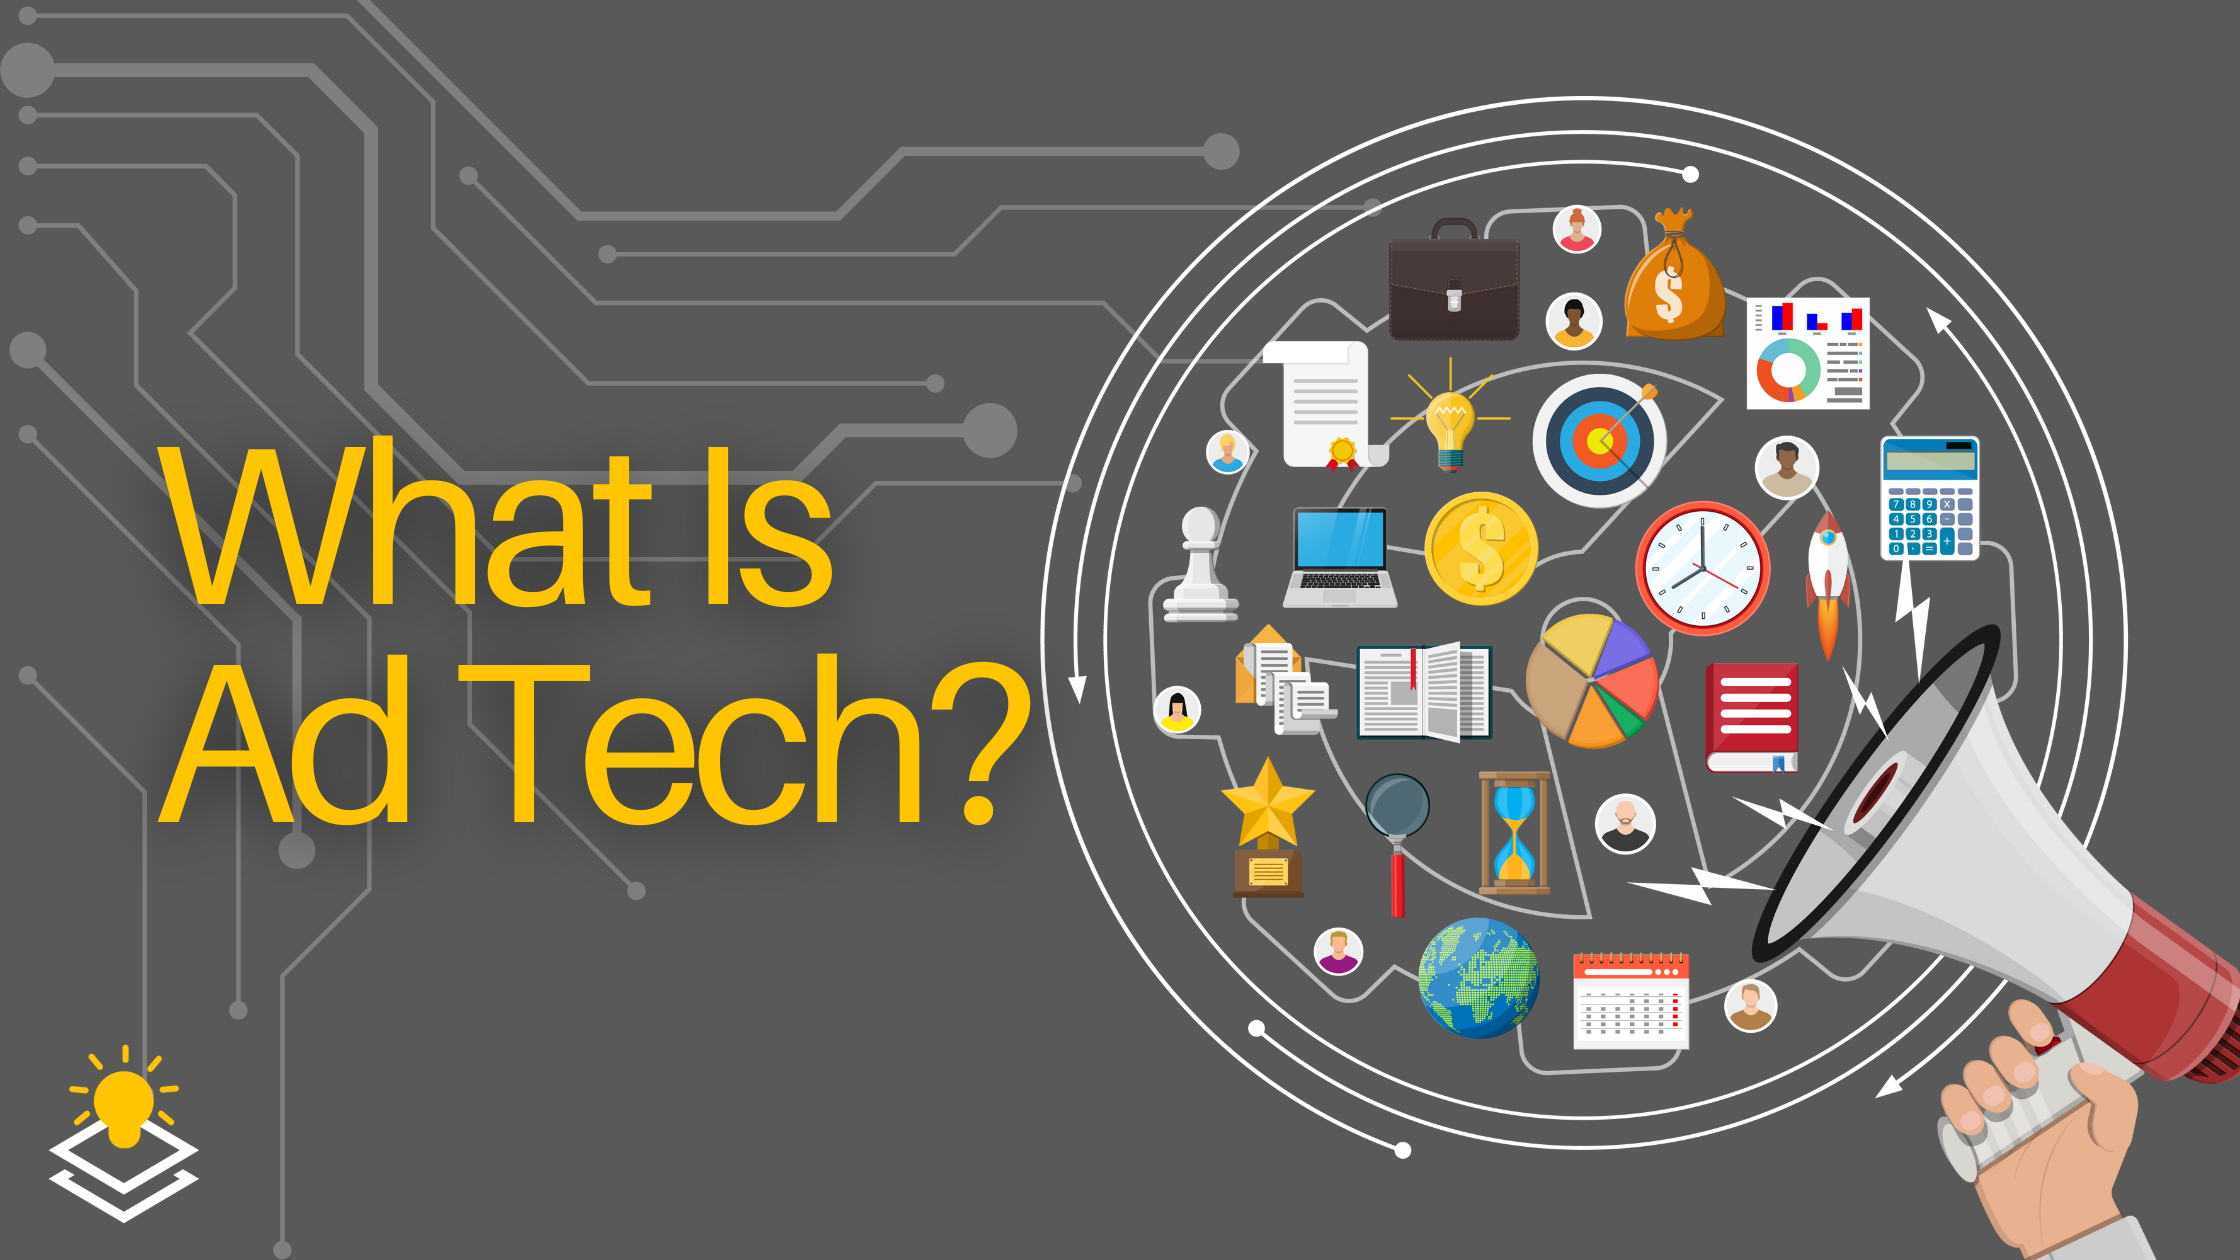 What Is Ad Tech?